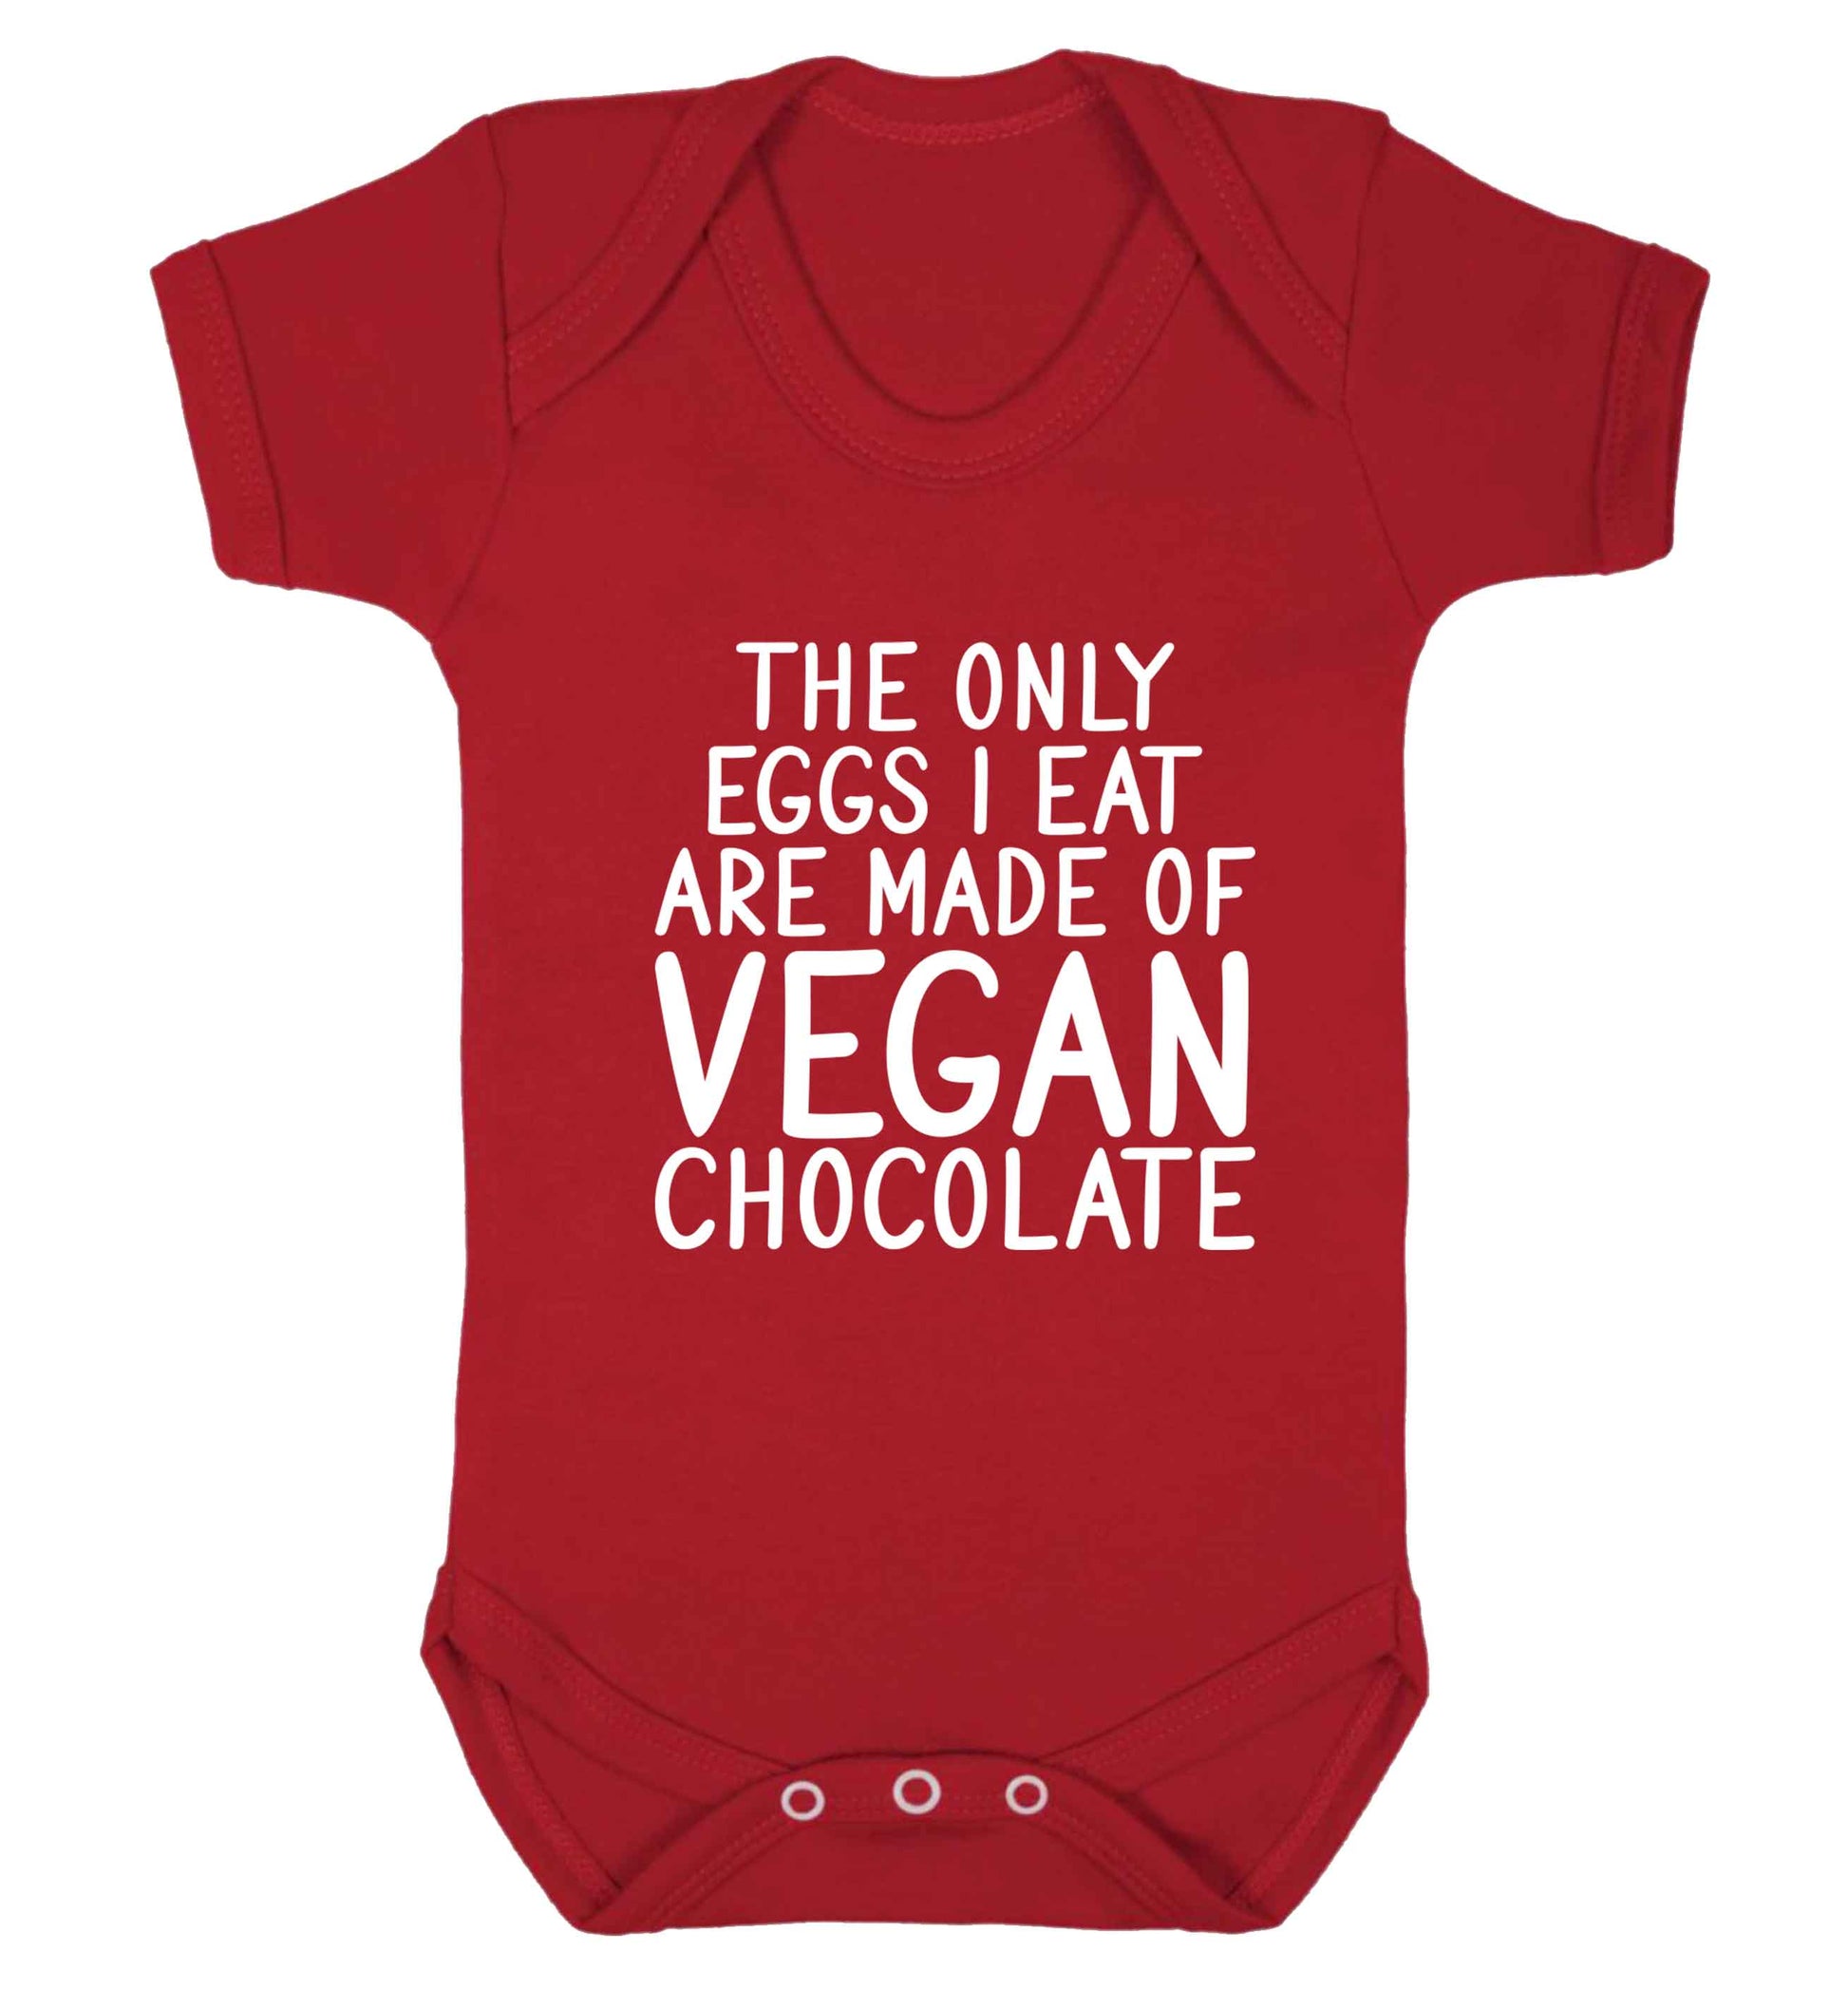 The only eggs I eat are made of vegan chocolate baby vest red 18-24 months